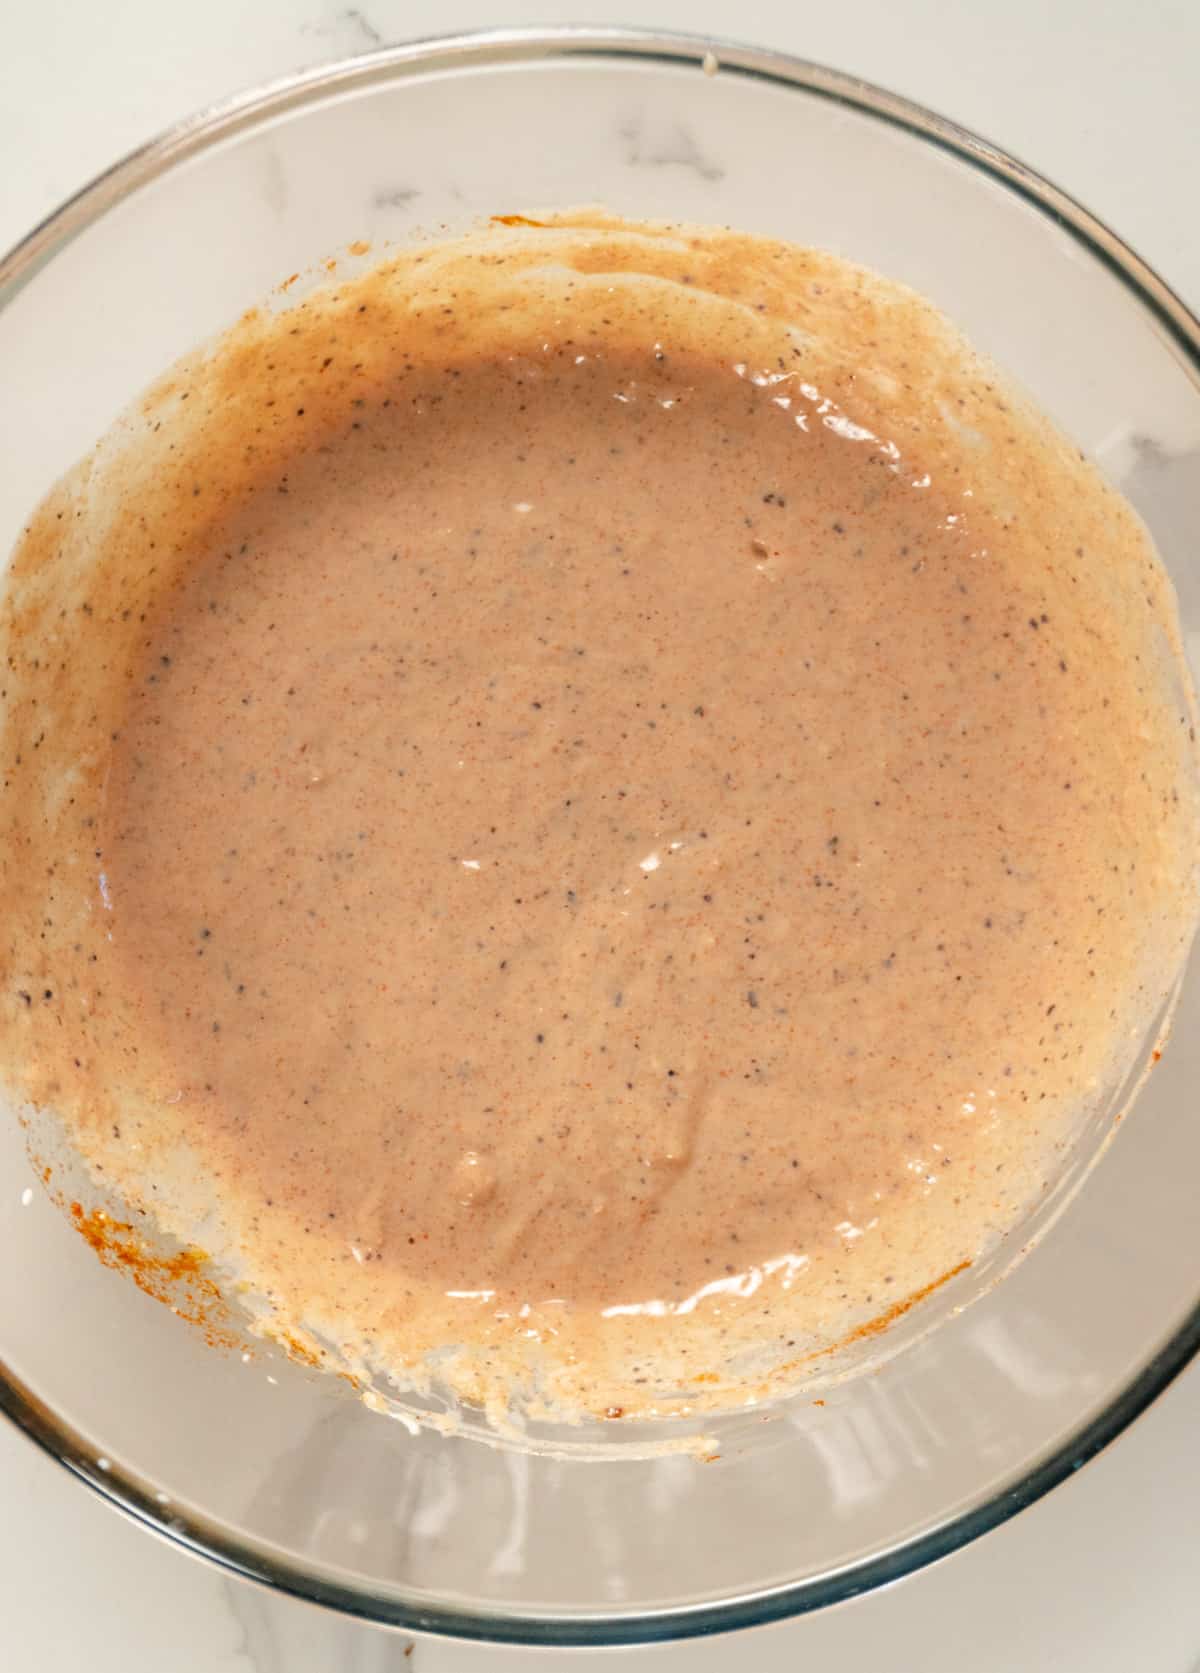 a pinkish sauce with dark specs through it in a glass bowl